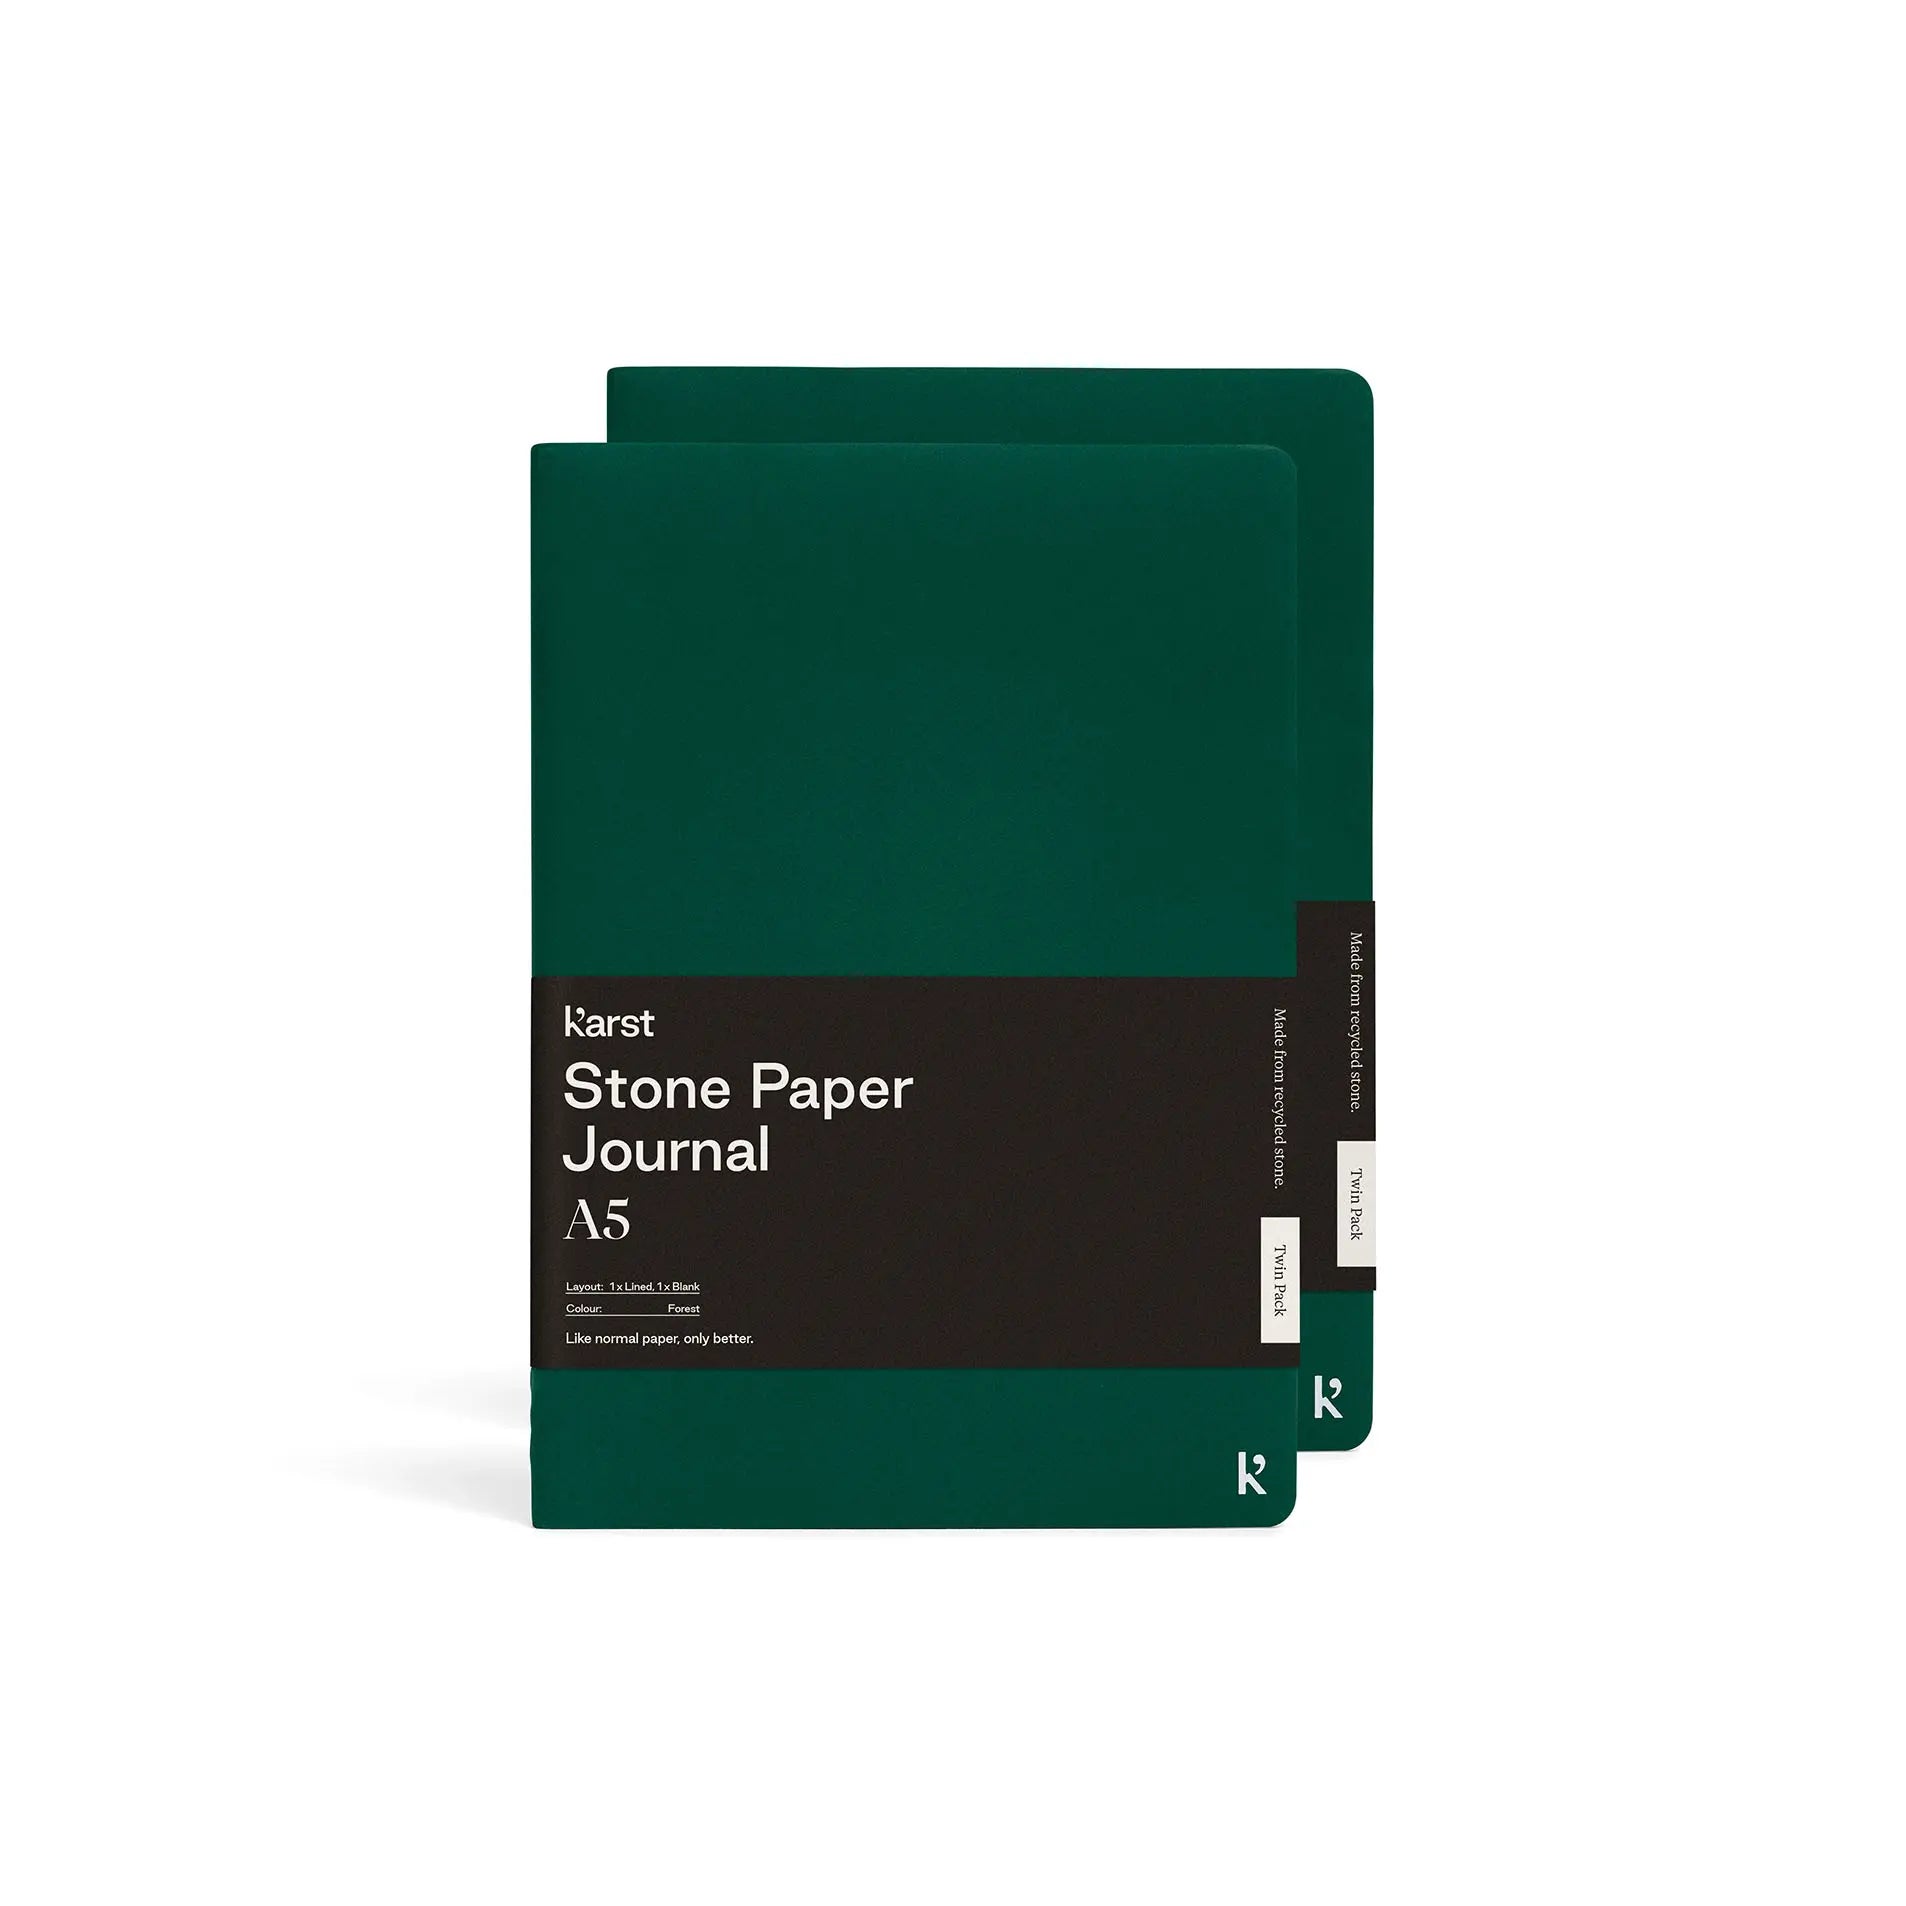 Karst stone paper journal A5 forest green twin pack voorkant